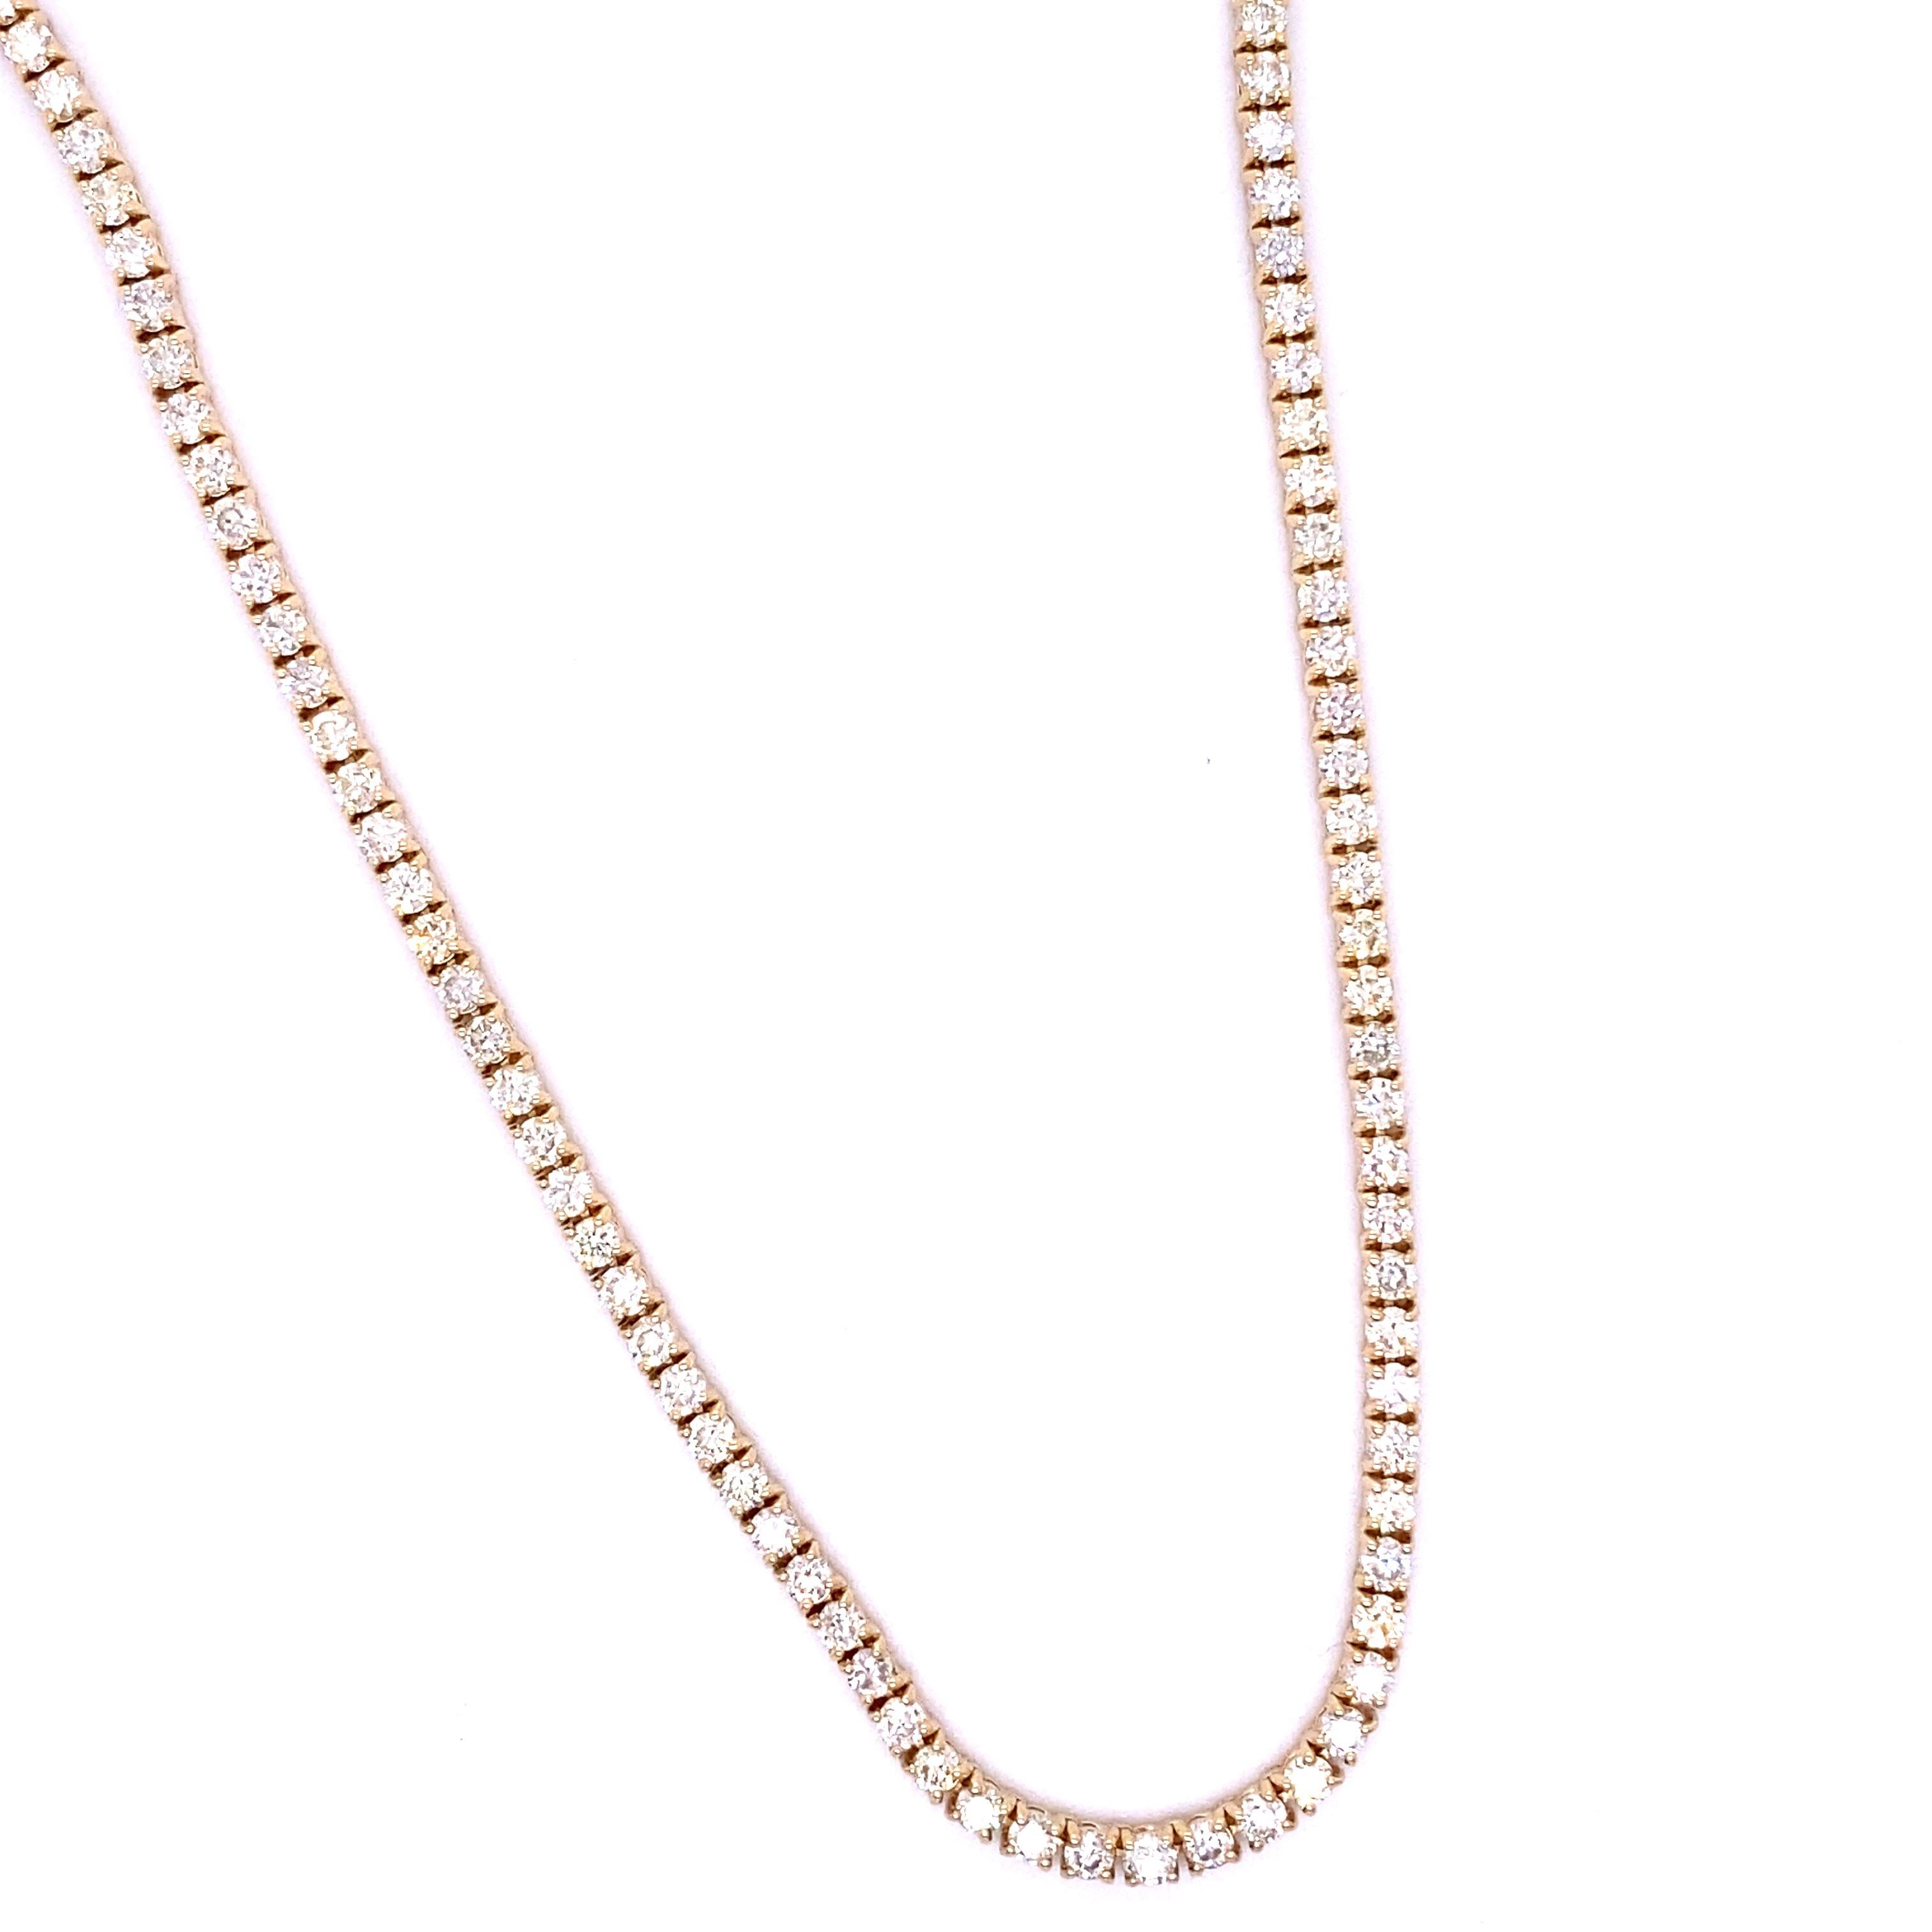 This tennis necklace features round brilliant cut diamonds in a prong setting. It is crafted from 18K yellow gold and has a total diamond weight of 7.30 carats.